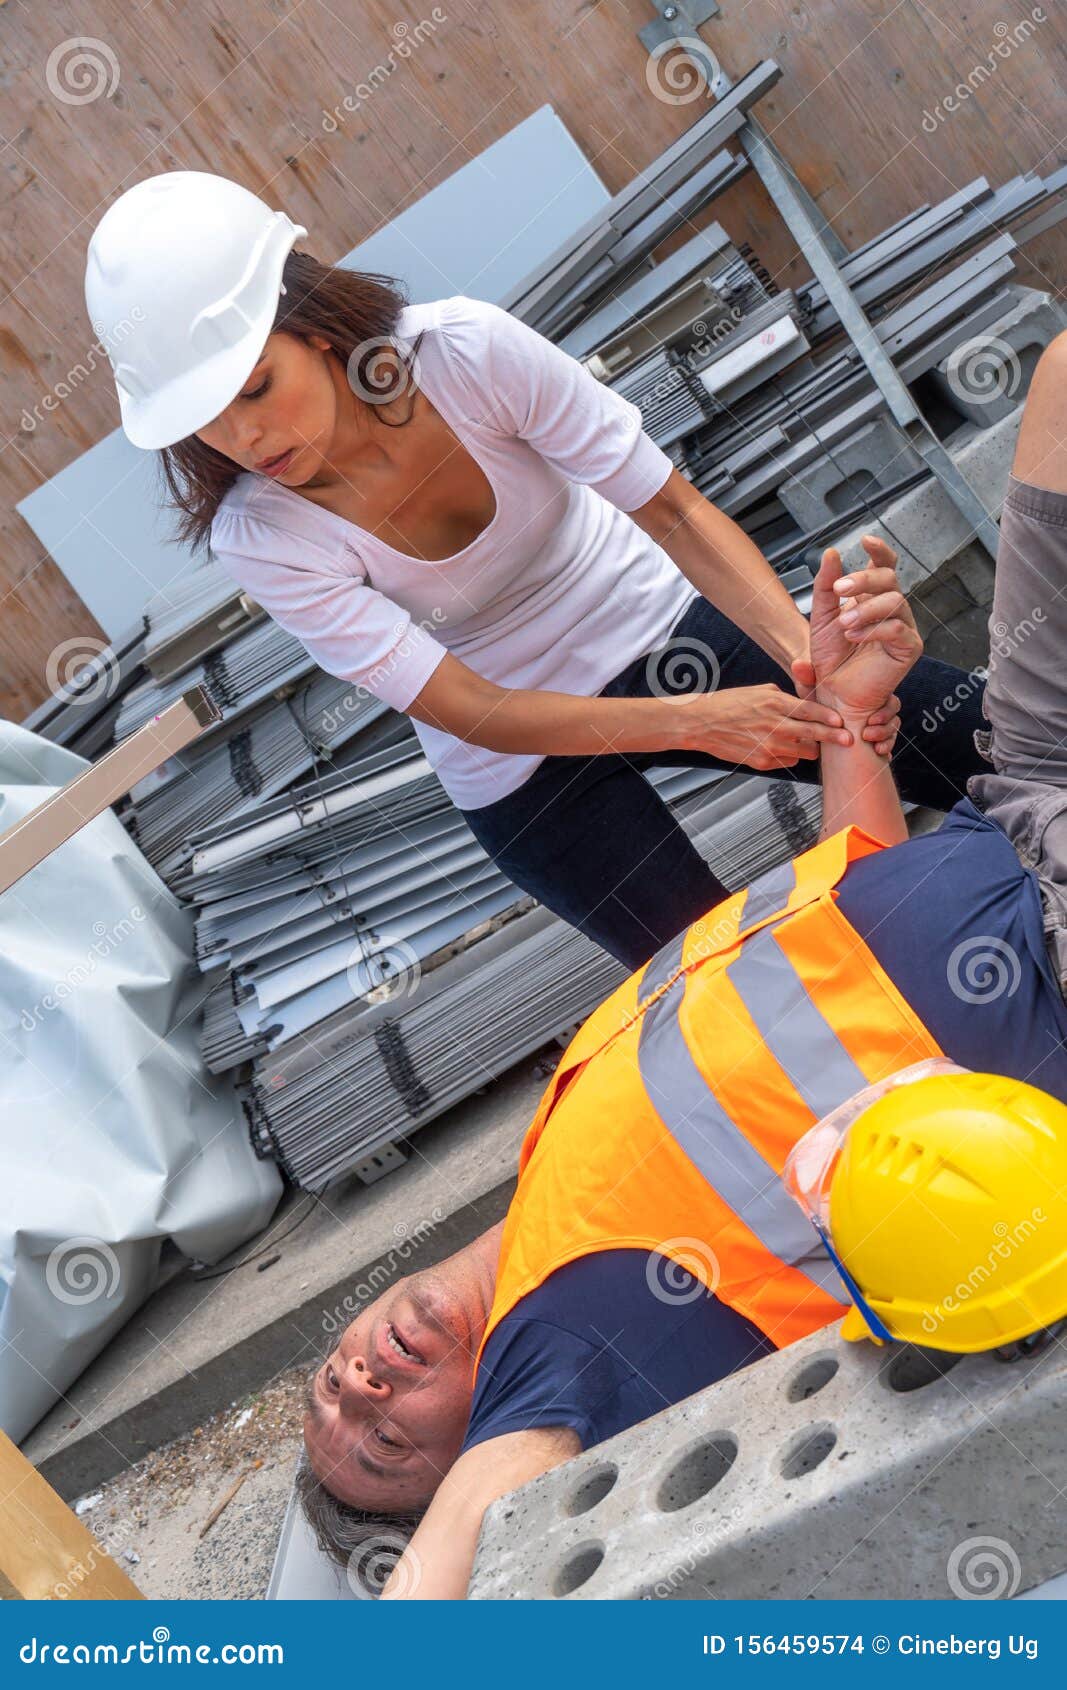 What is the condition of the construction worker injured